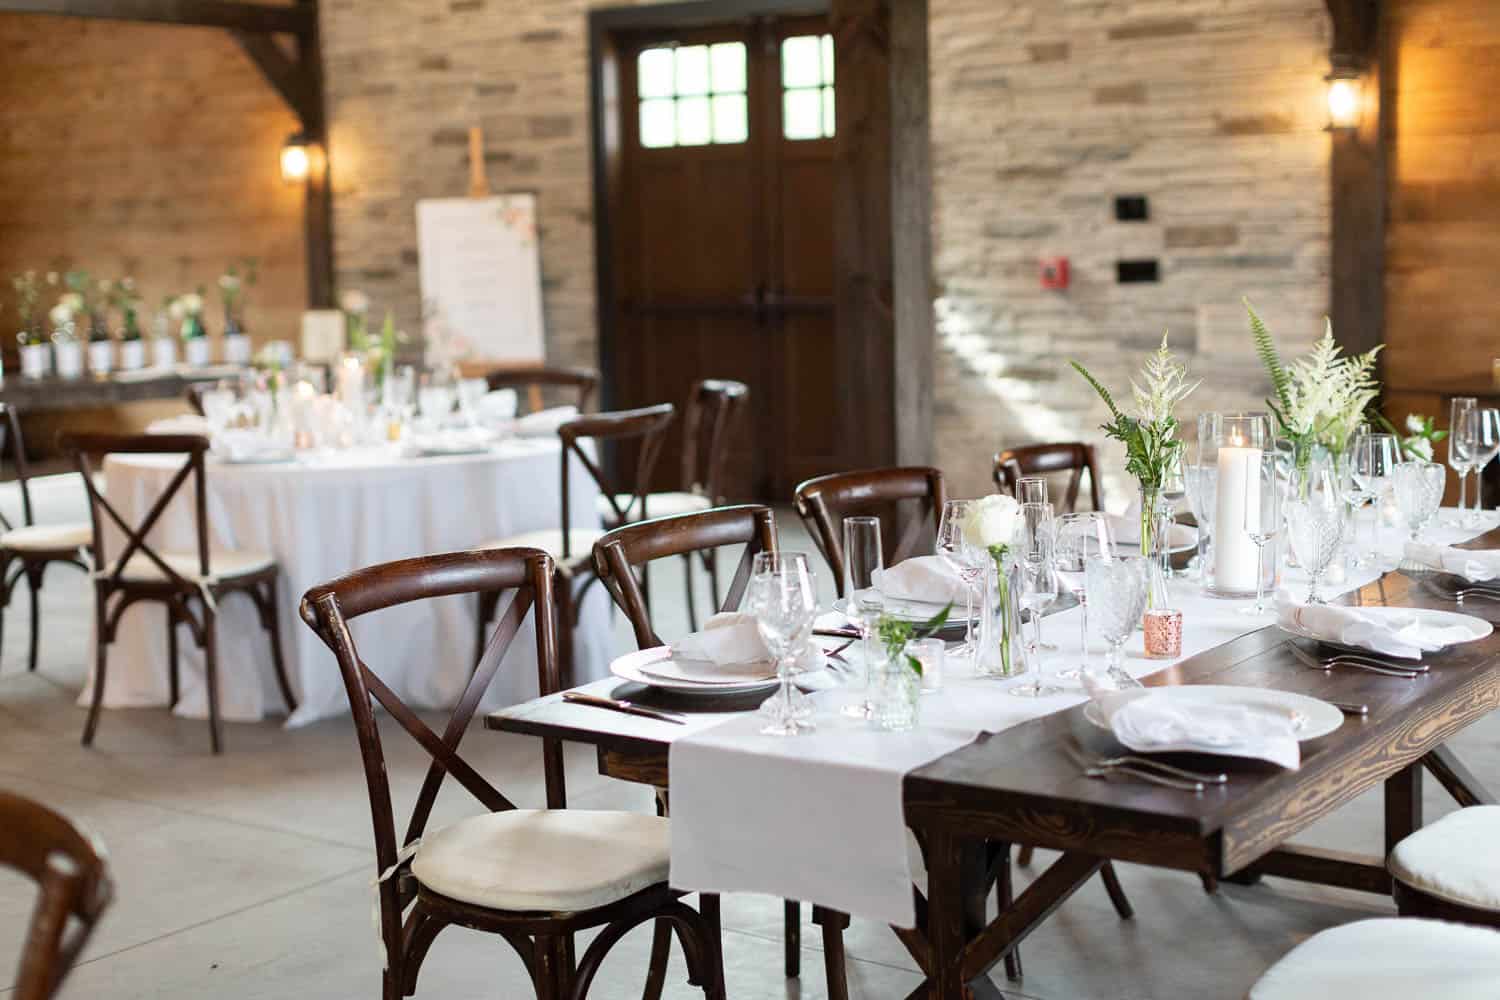 Elegant indoor dining setup at a wedding venue with white tablecloths, wooden chairs, and simple floral centerpieces.